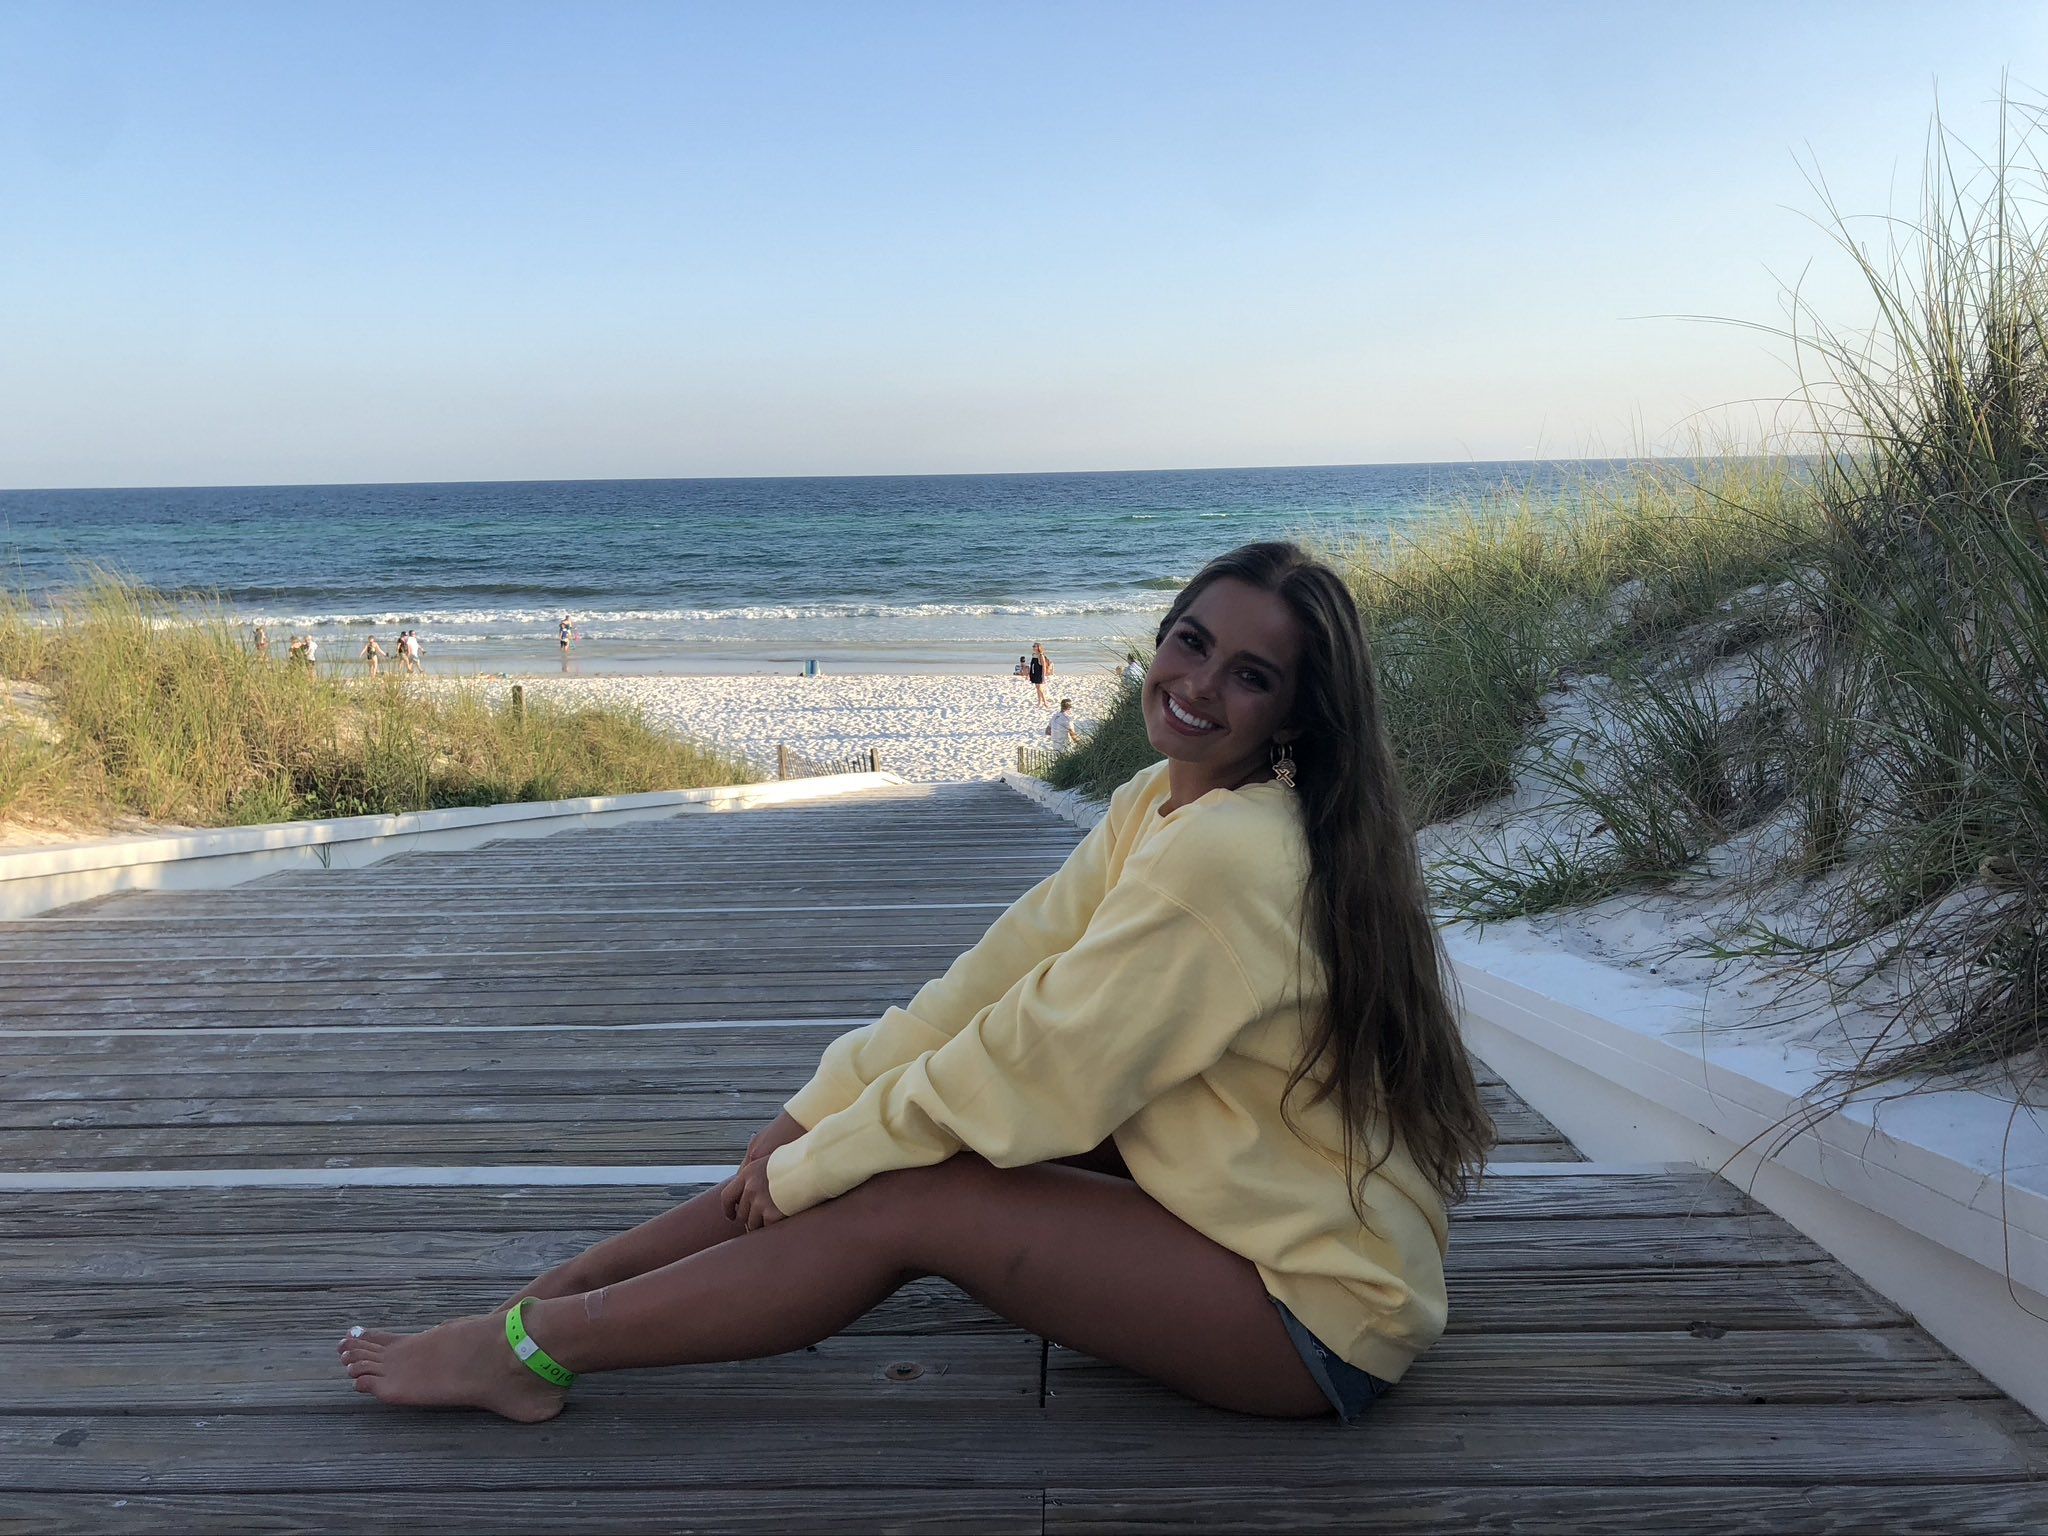 Addison Rae 2019 was one of the best <3 i wanna go lay on the beach right now